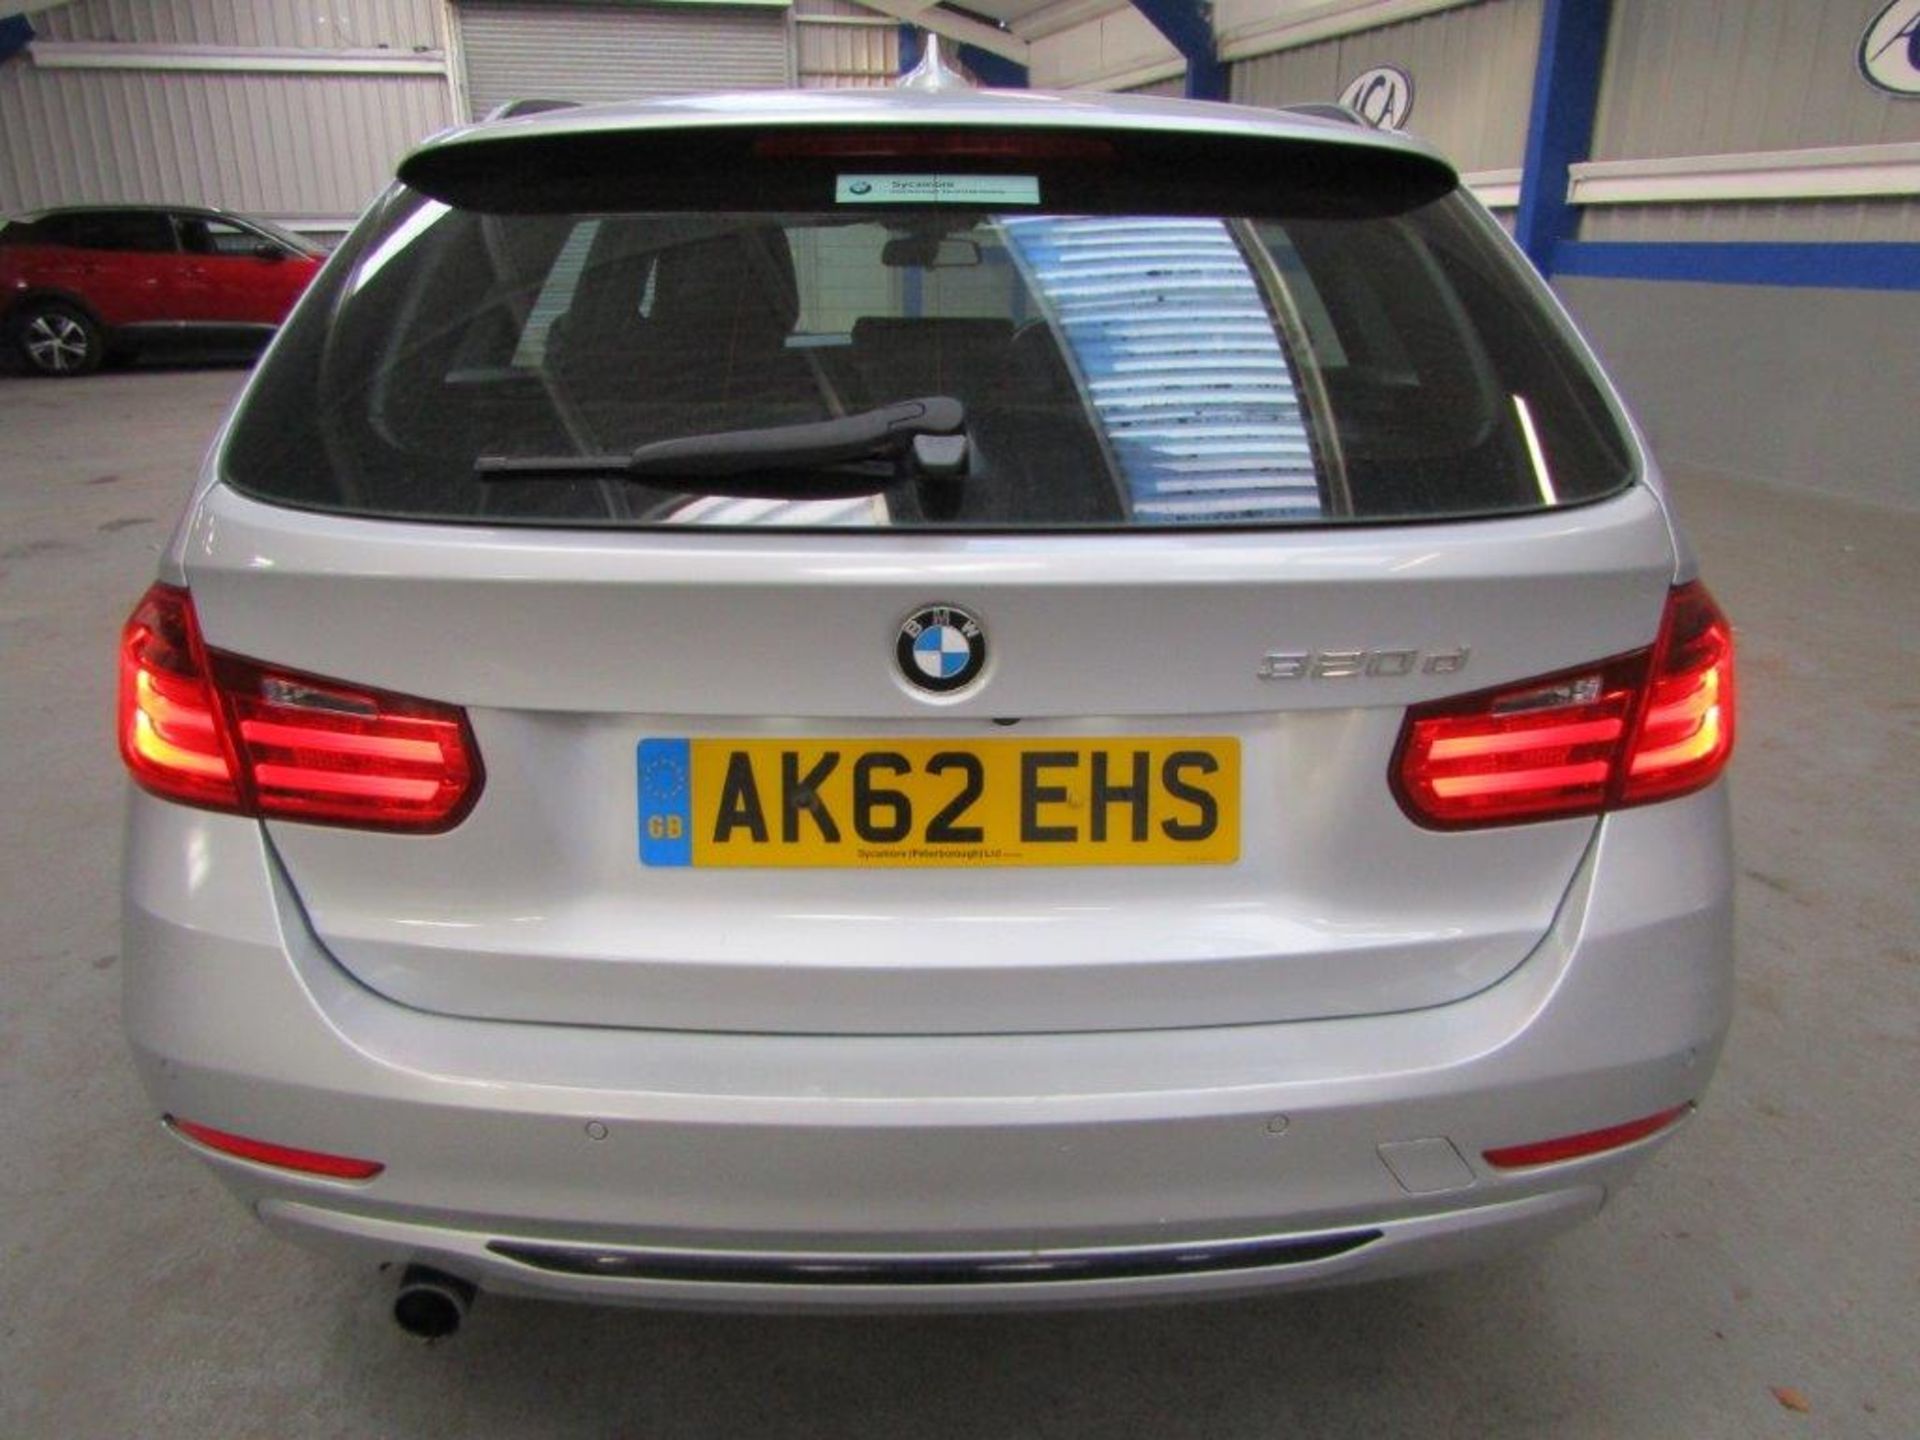 62 12 BMW 320D Sport Touring - Image 22 of 29